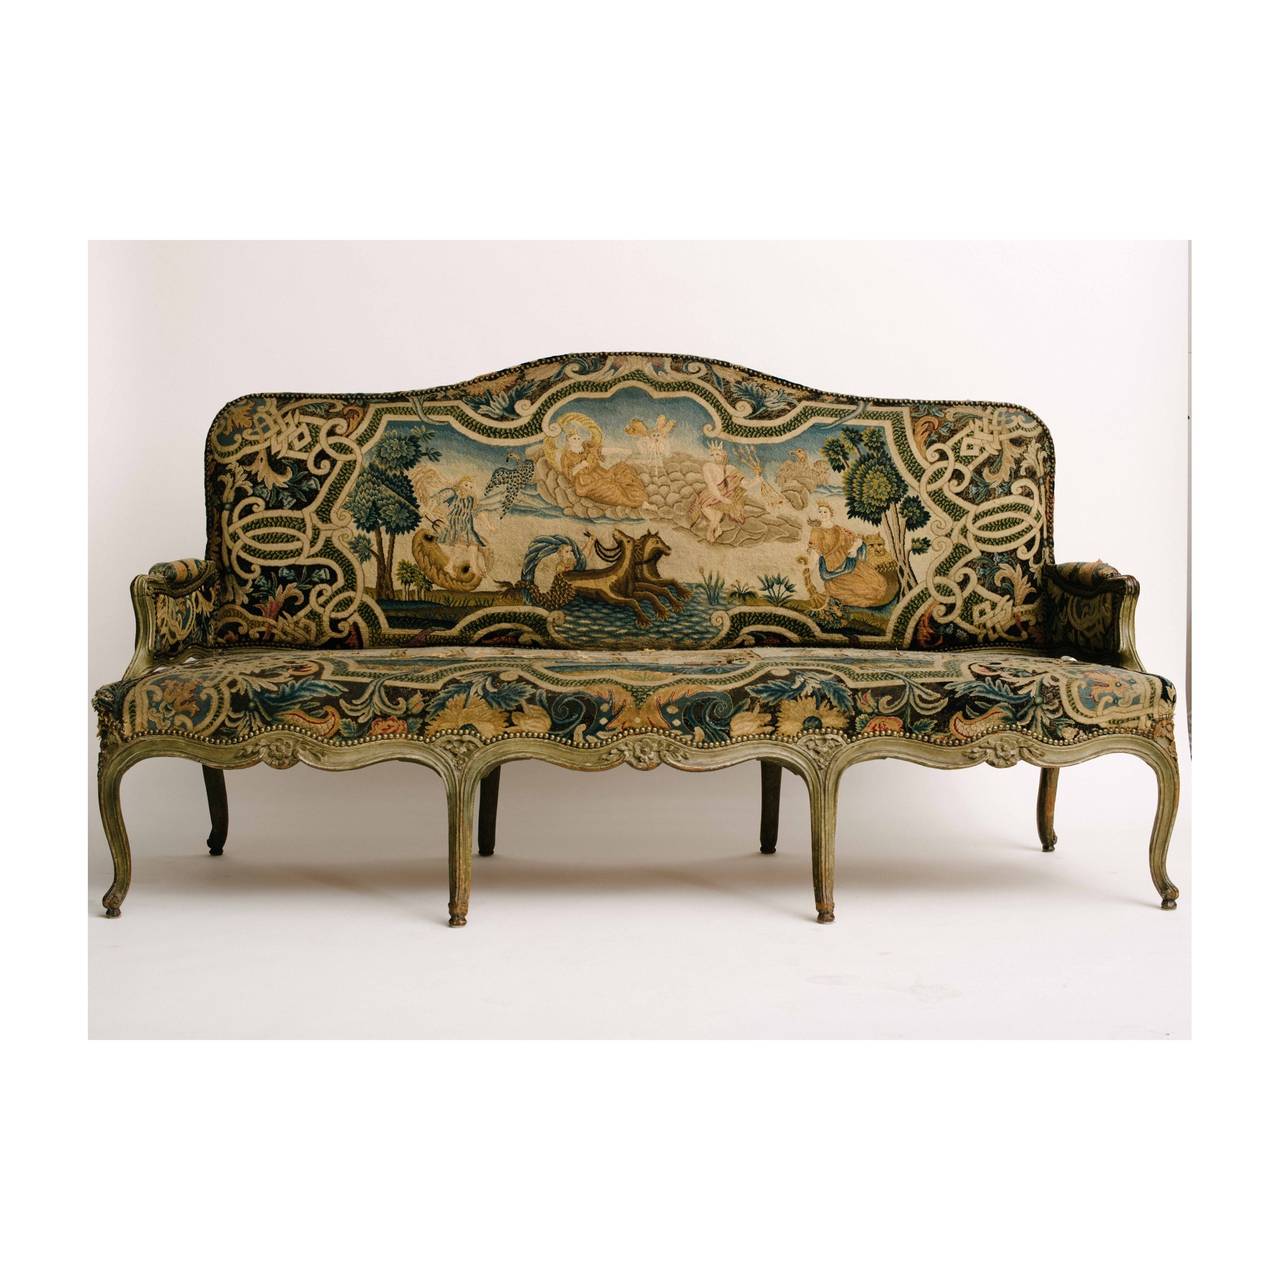 A fabulous carved 18th Century French Louis XV sofa upholstered in an exquisite antique Poseidon and Triton Greek mythology tapestry. Please inquire for pricing.